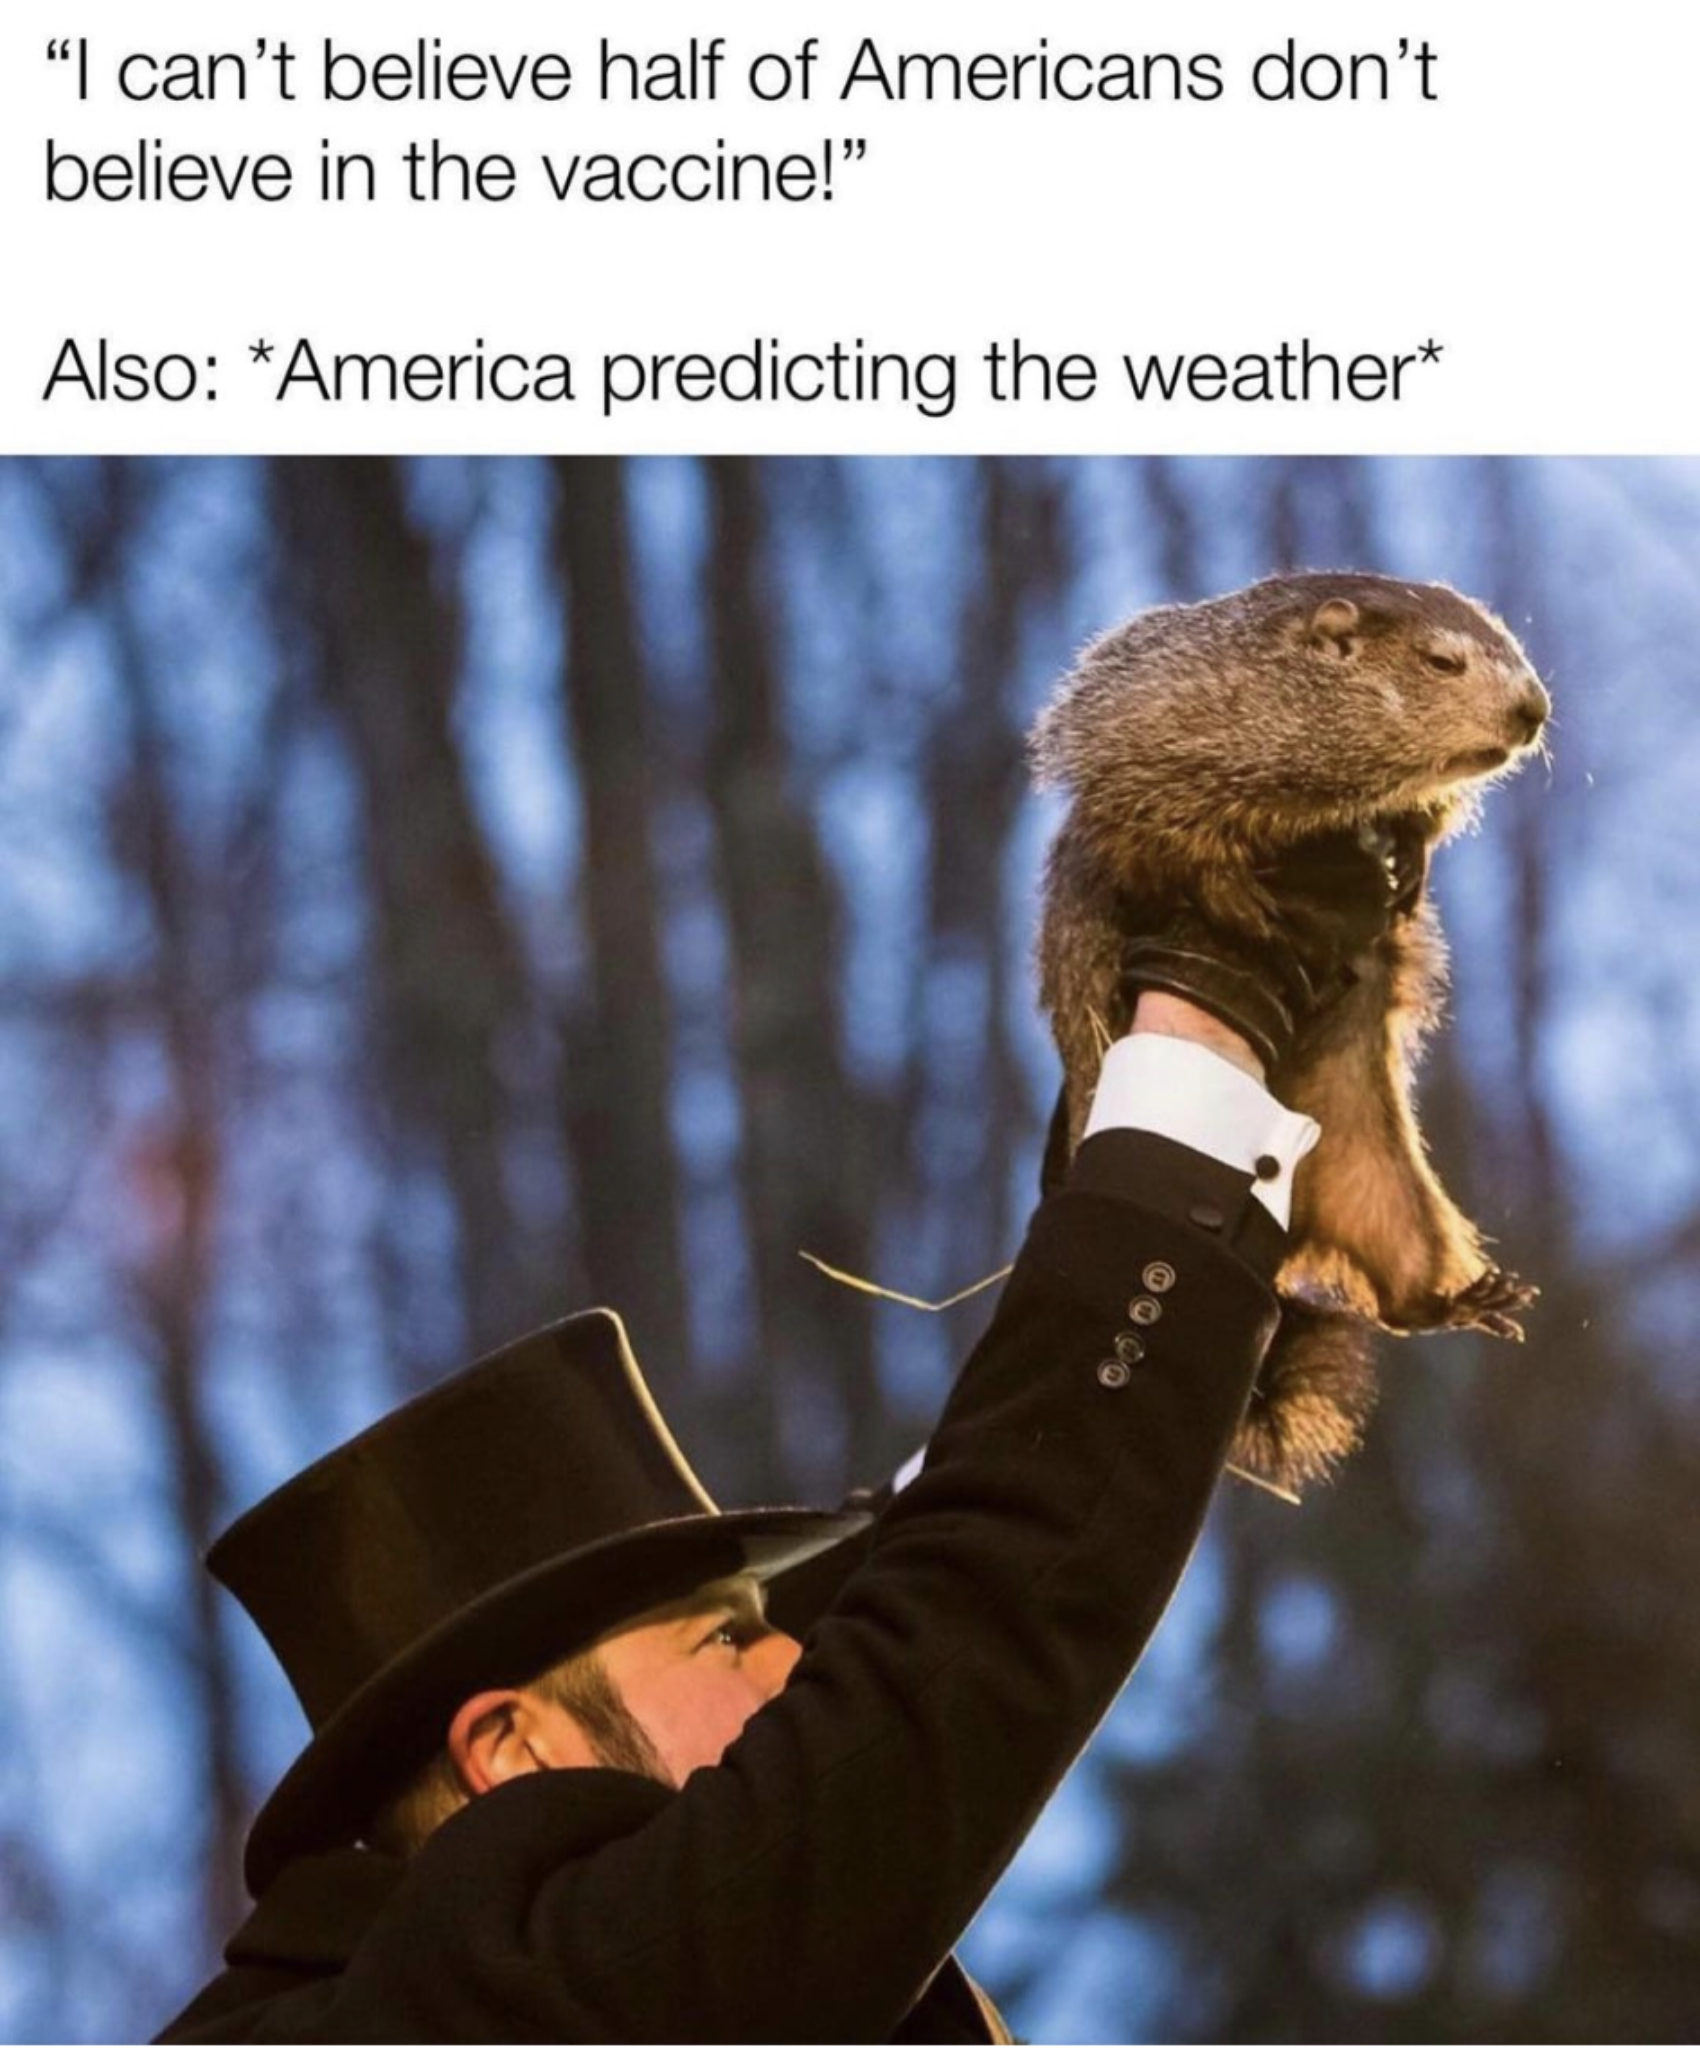 punxsutawney phil free - "I can't believe half of Americans don't believe in the vaccine!" Also America predicting the weather